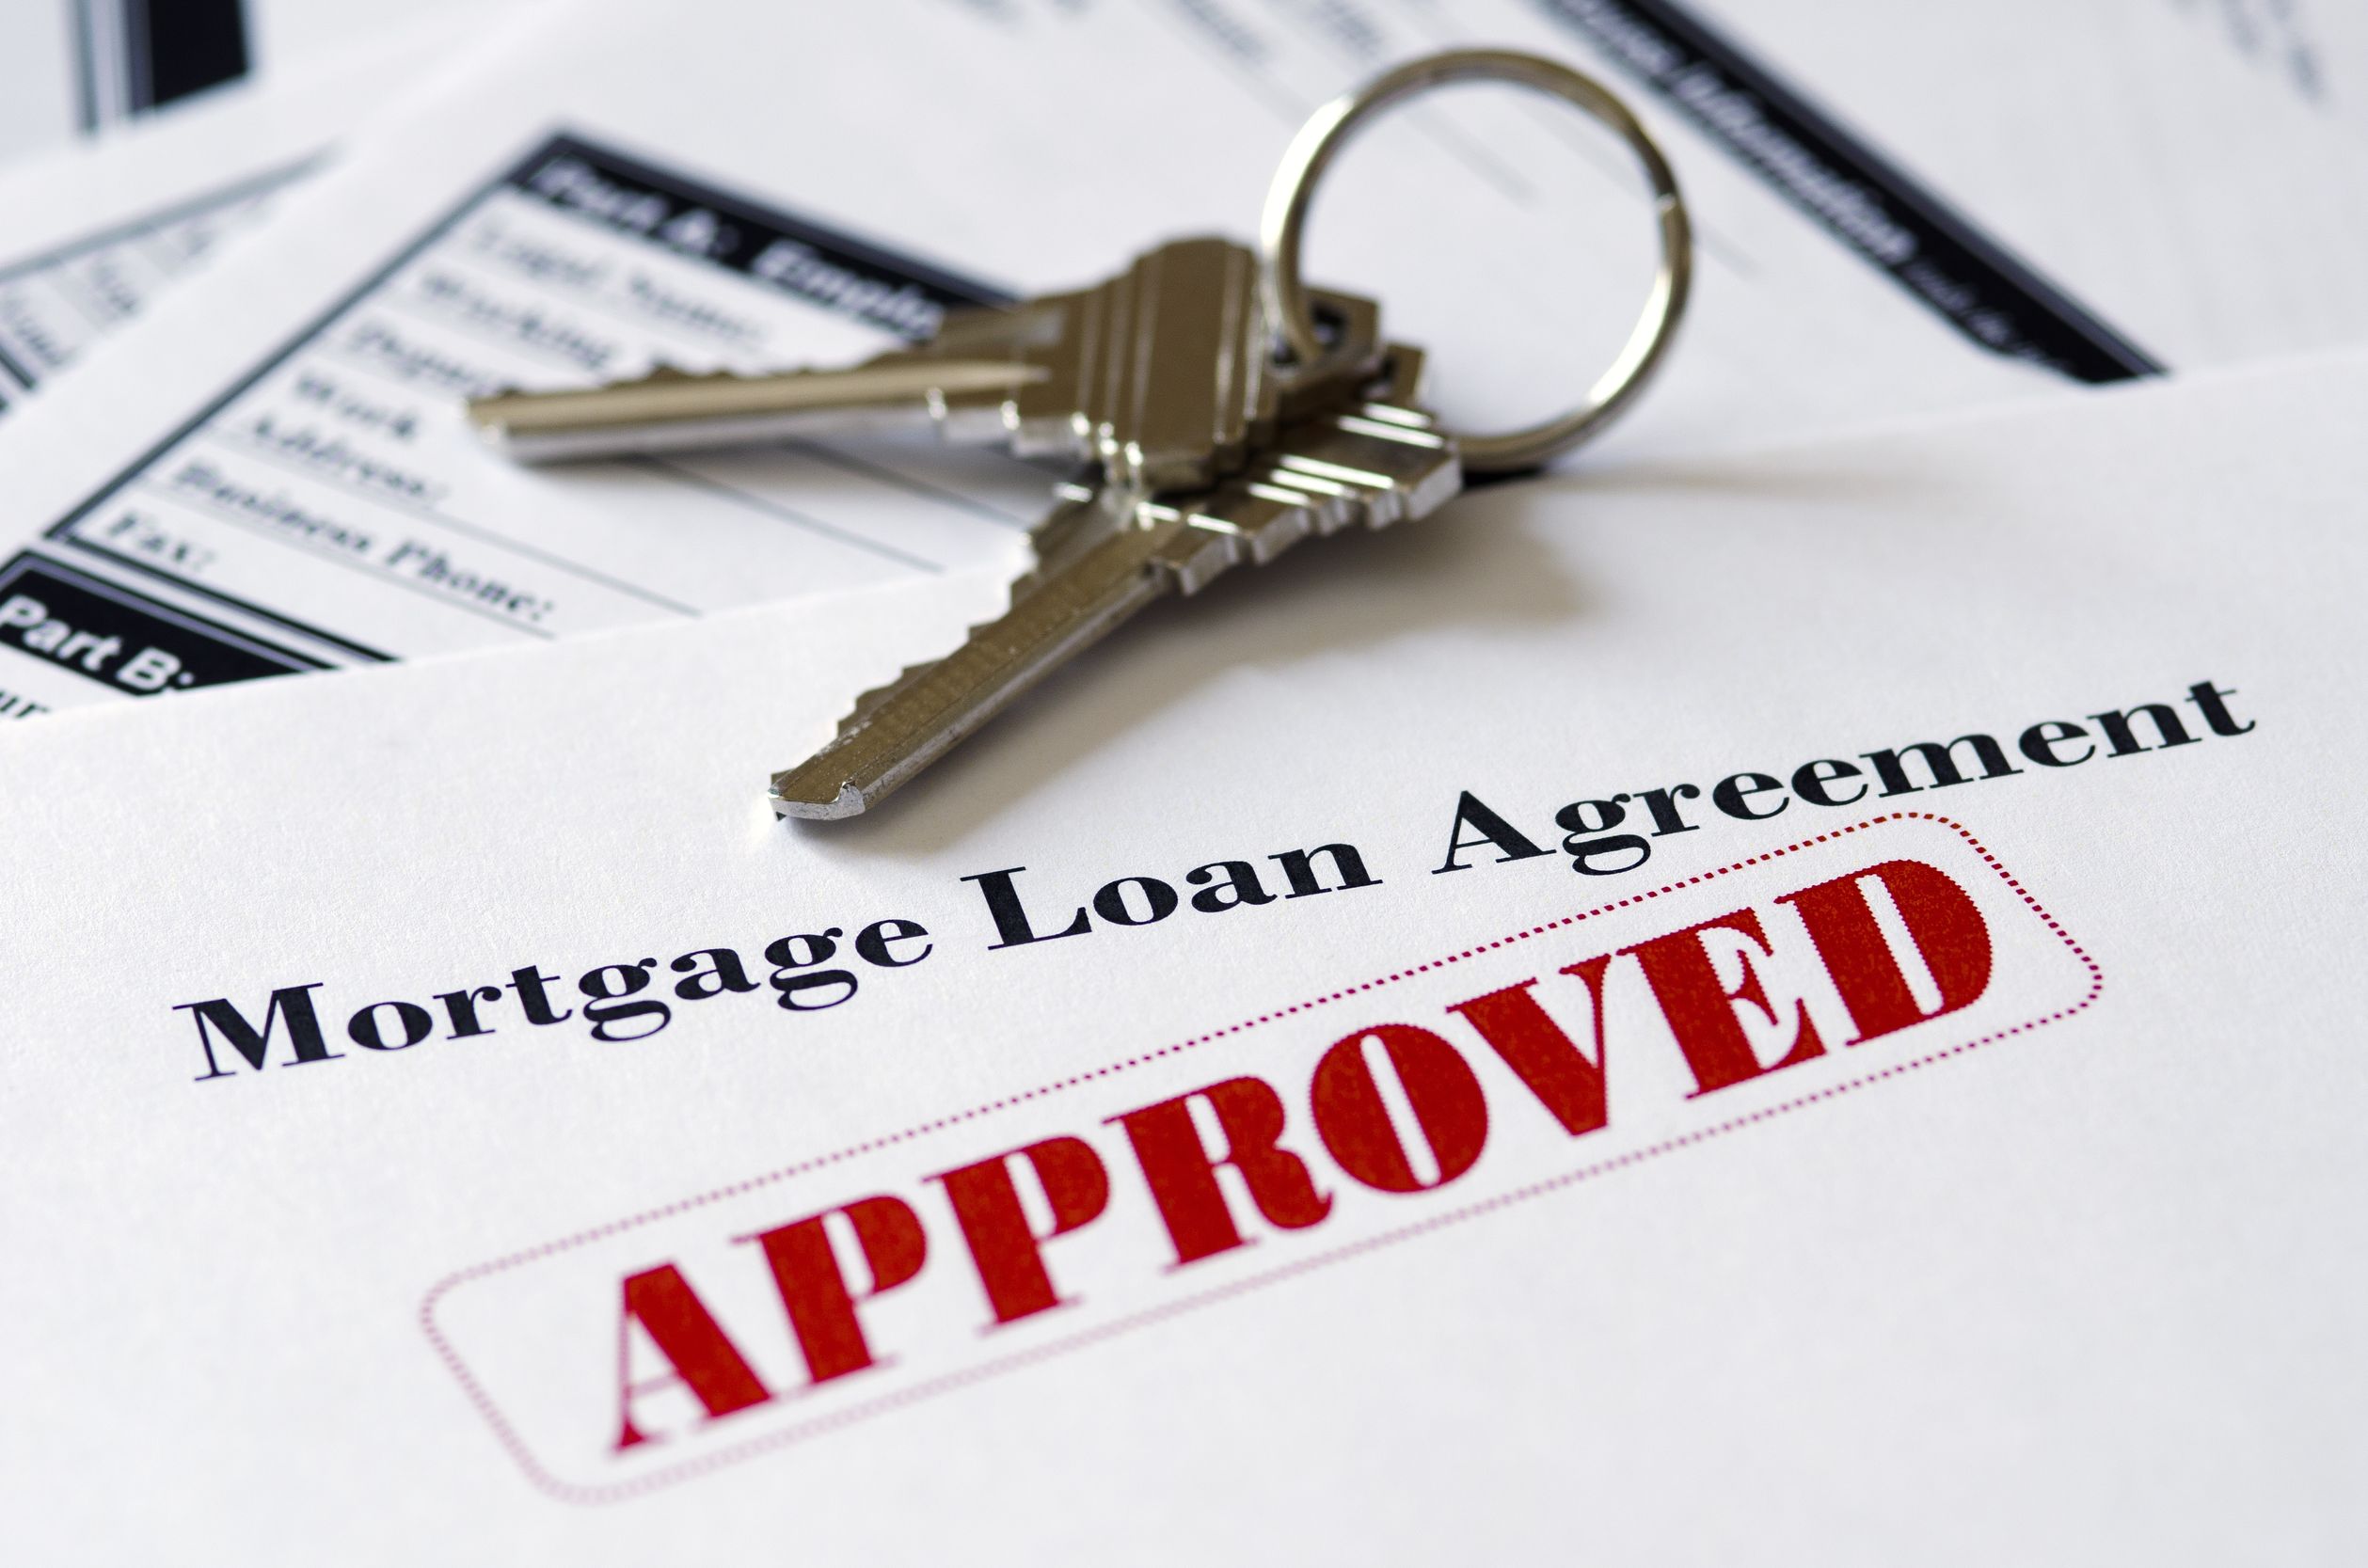 MORTGAGE APPROVAL HITS 13 YEAR HIGH